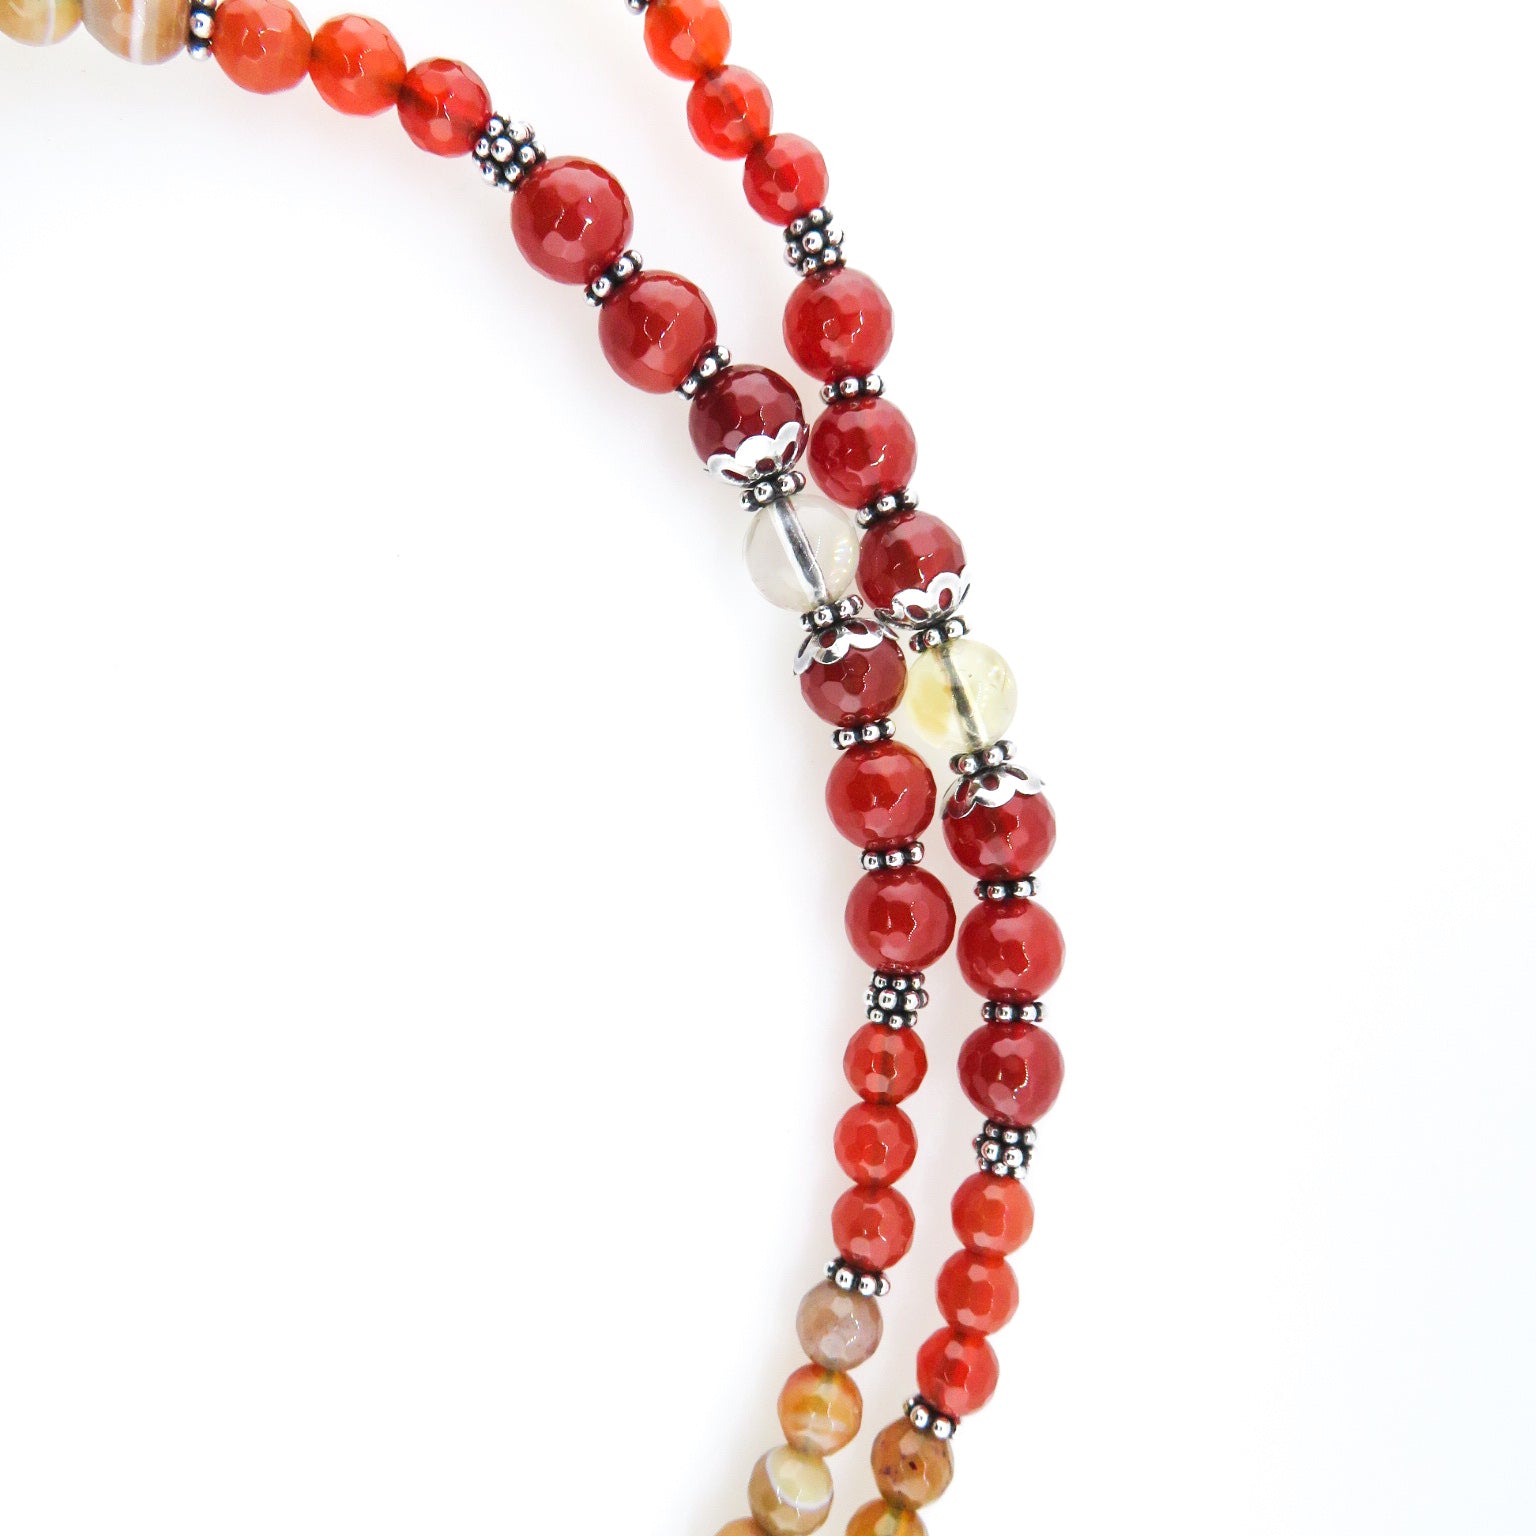 Agate Necklace with Citrine, Carnelian and Silver Beads